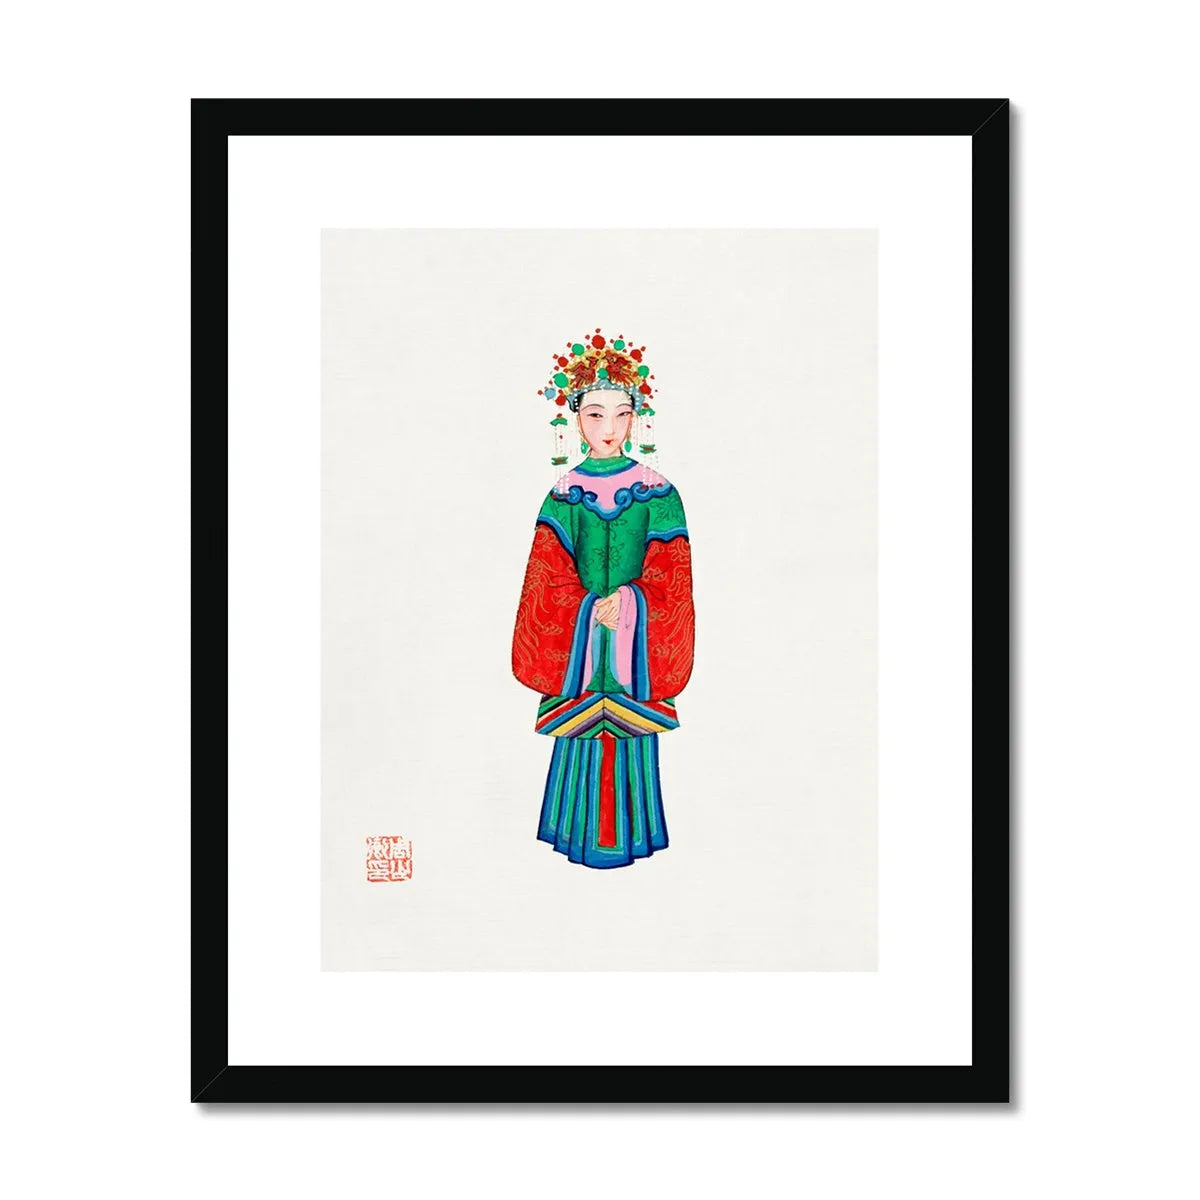 Chinese Imperial Princess Framed & Mounted Print - 16’x20’ / Black Frame - Posters Prints & Visual Artwork